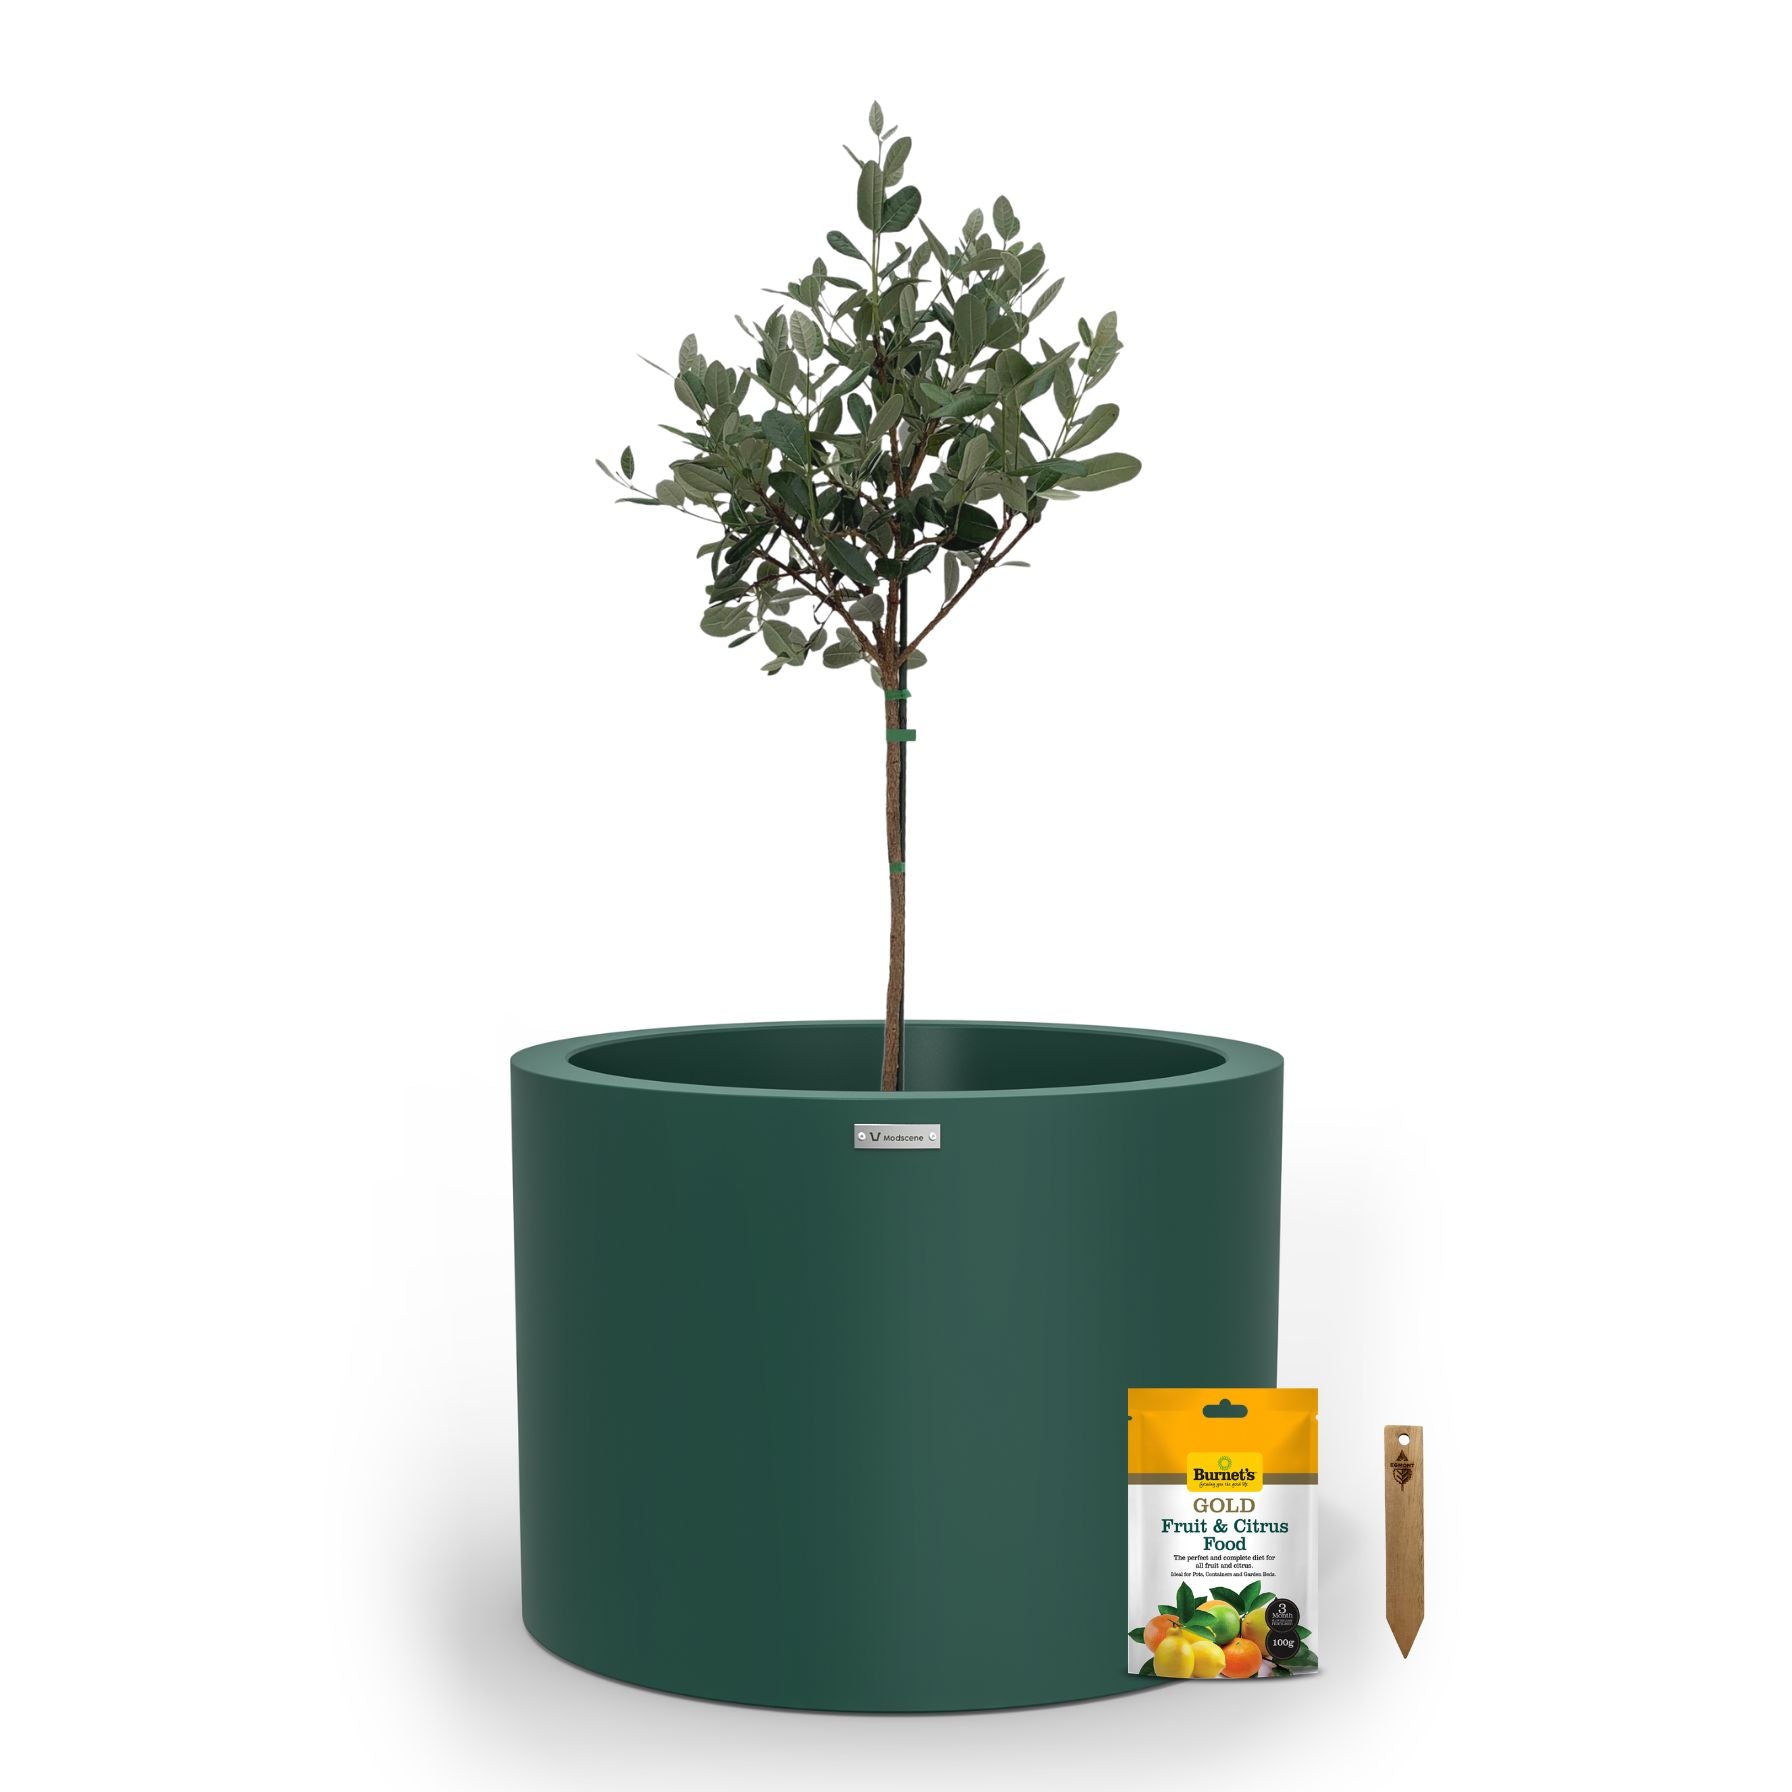 A large emerald green planter pot used to plant fruit trees. 